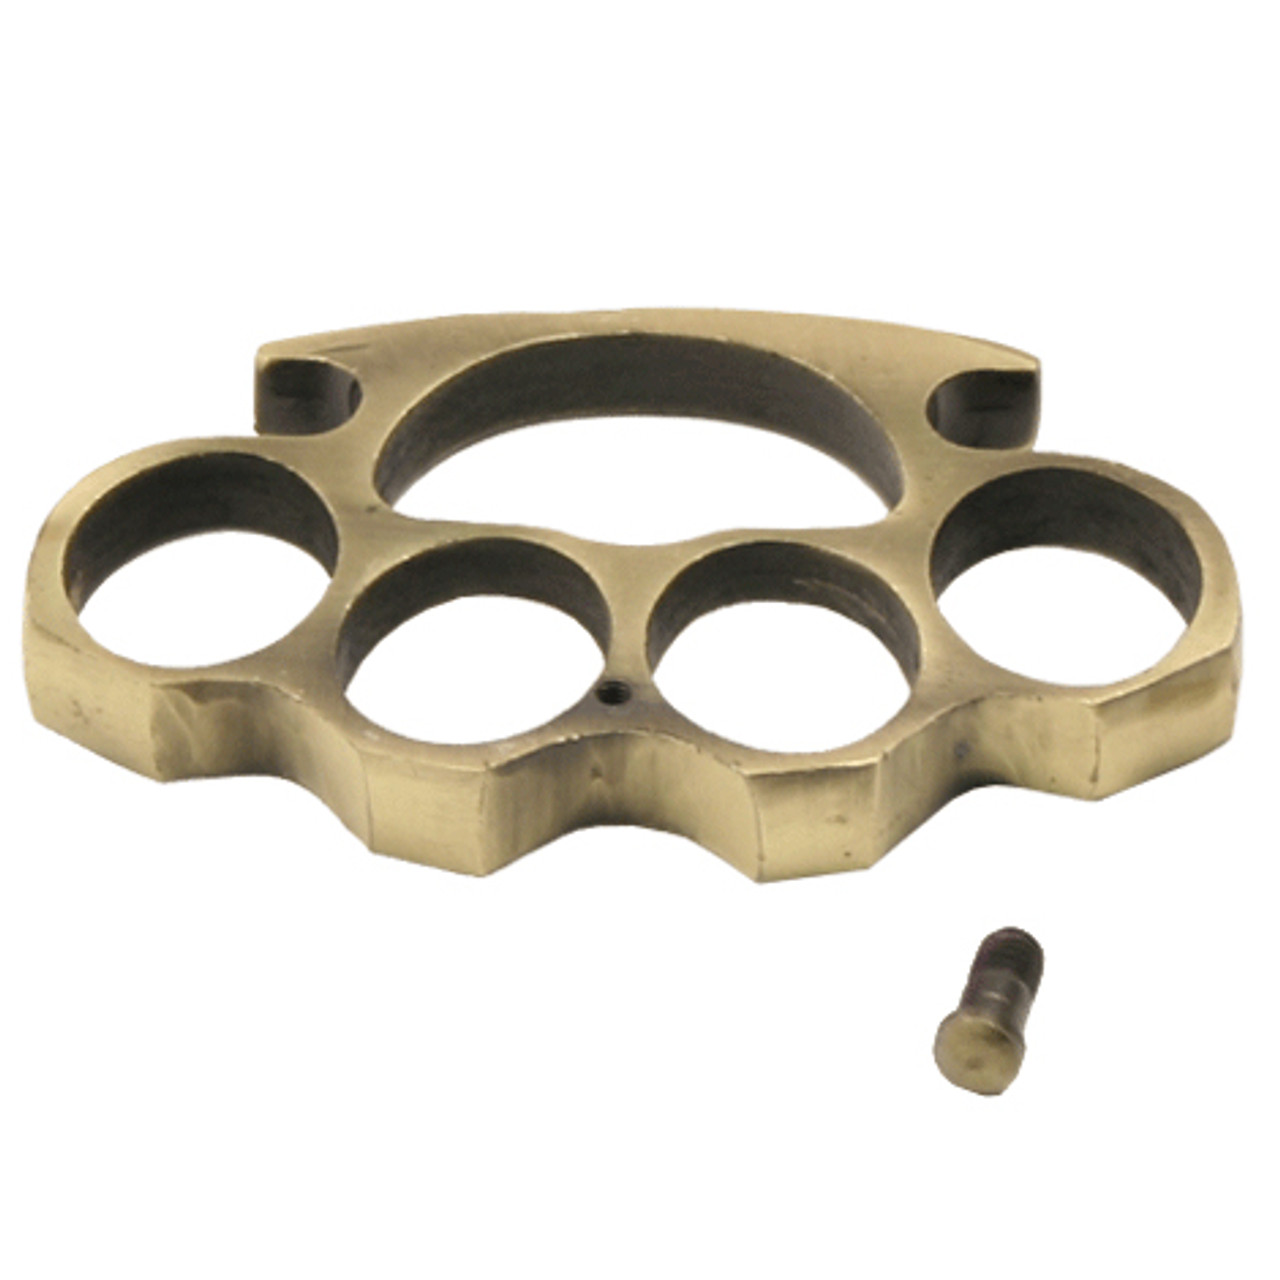 Knuckle Duster Belt Buckle Paper Weight